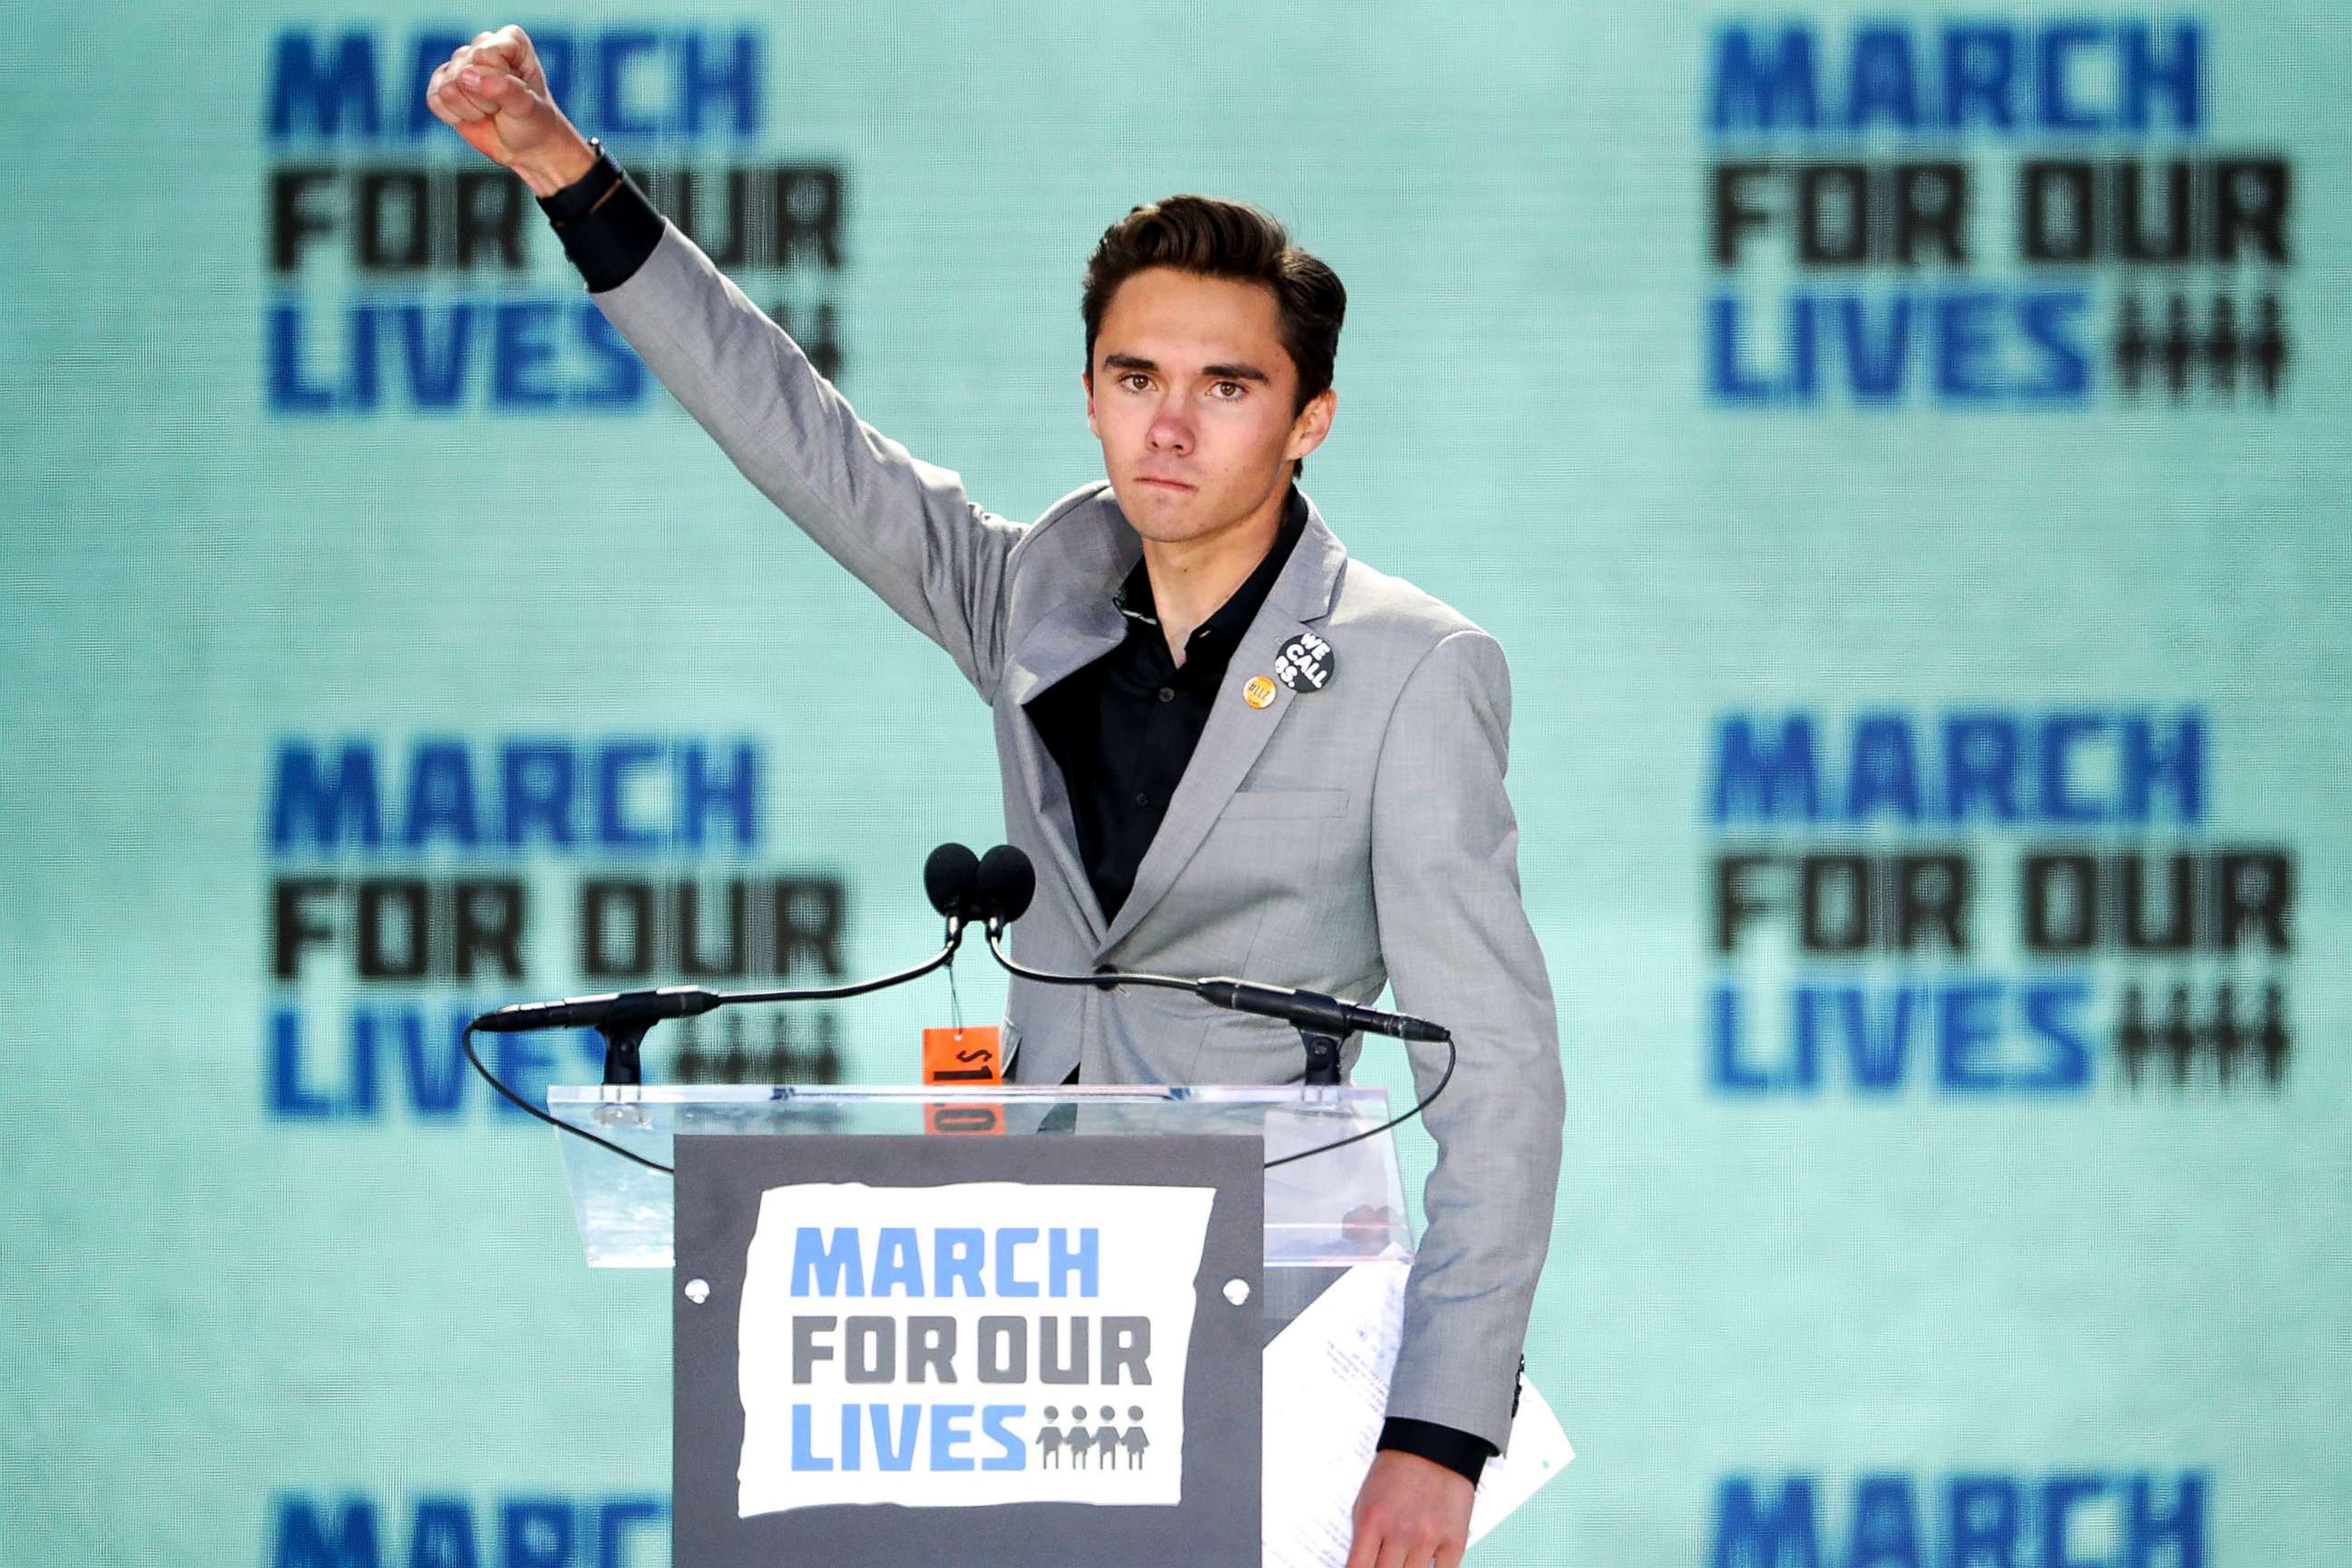 PHOTO: Marjory Stoneman Douglas High School Student David Hogg addresses the March for Our Lives rally on March 24, 2018, in Washington, D.C.